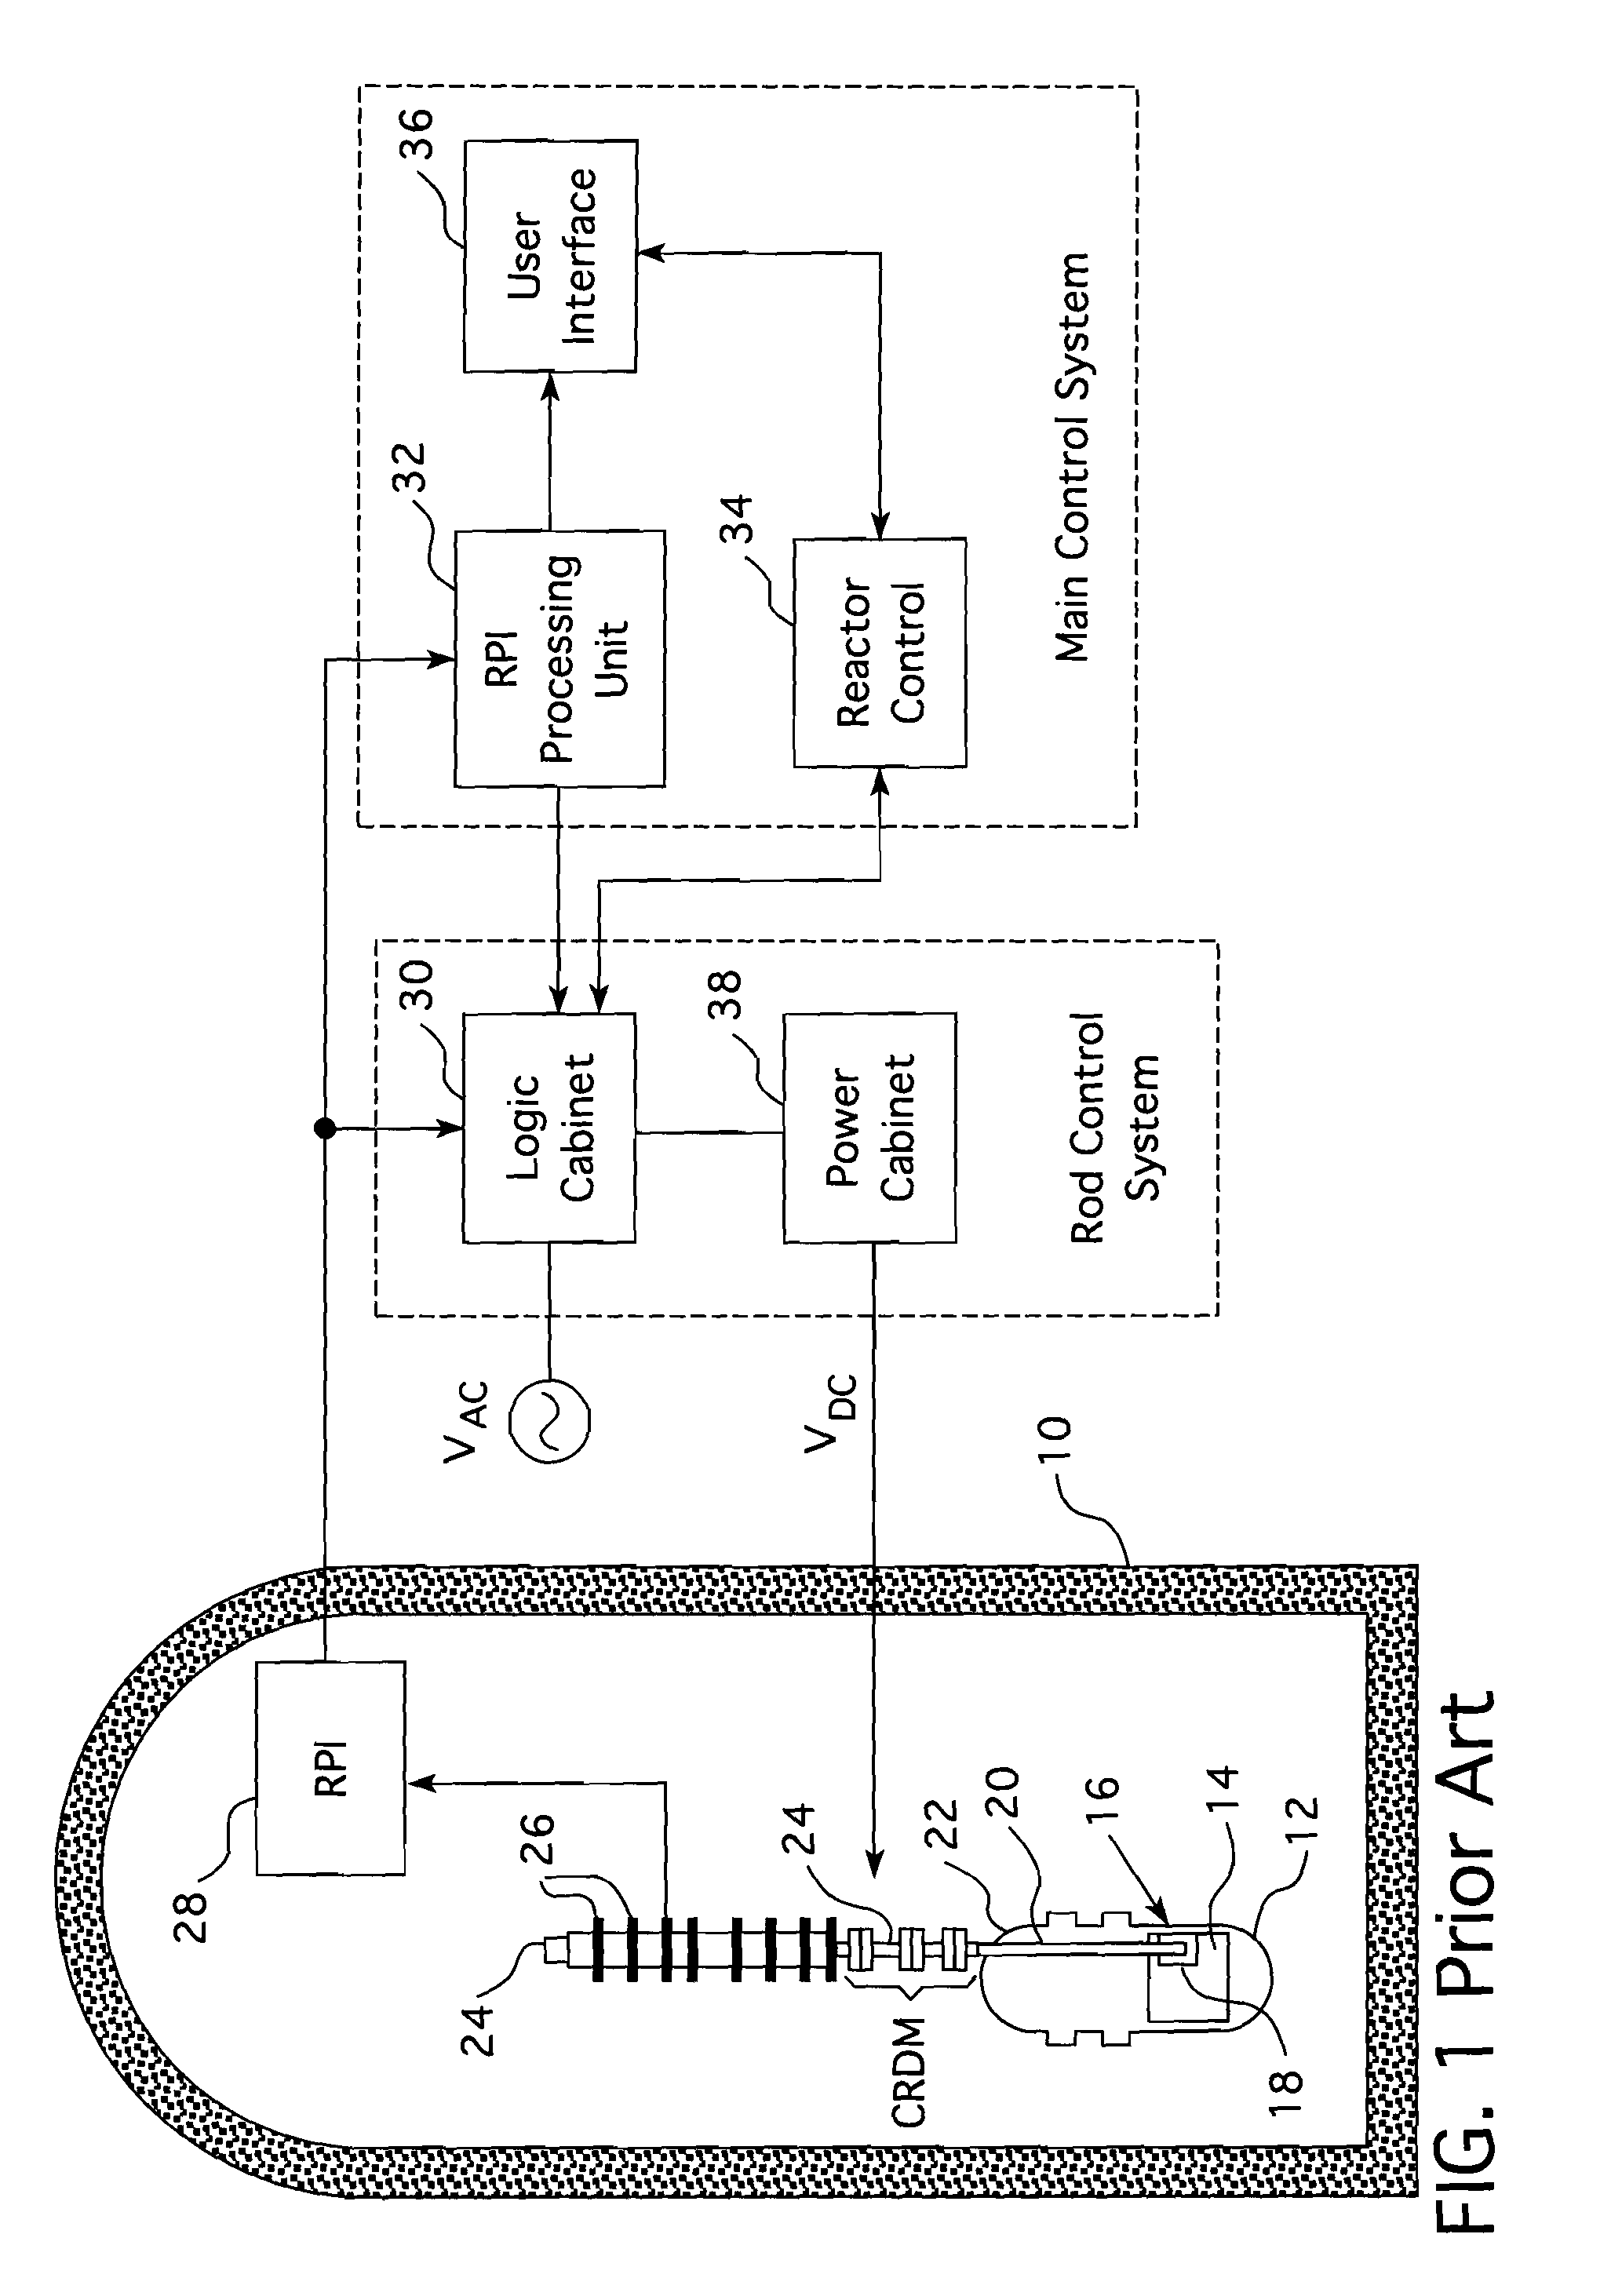 Nuclear reactor internal electric control rod drive mechanism assembly